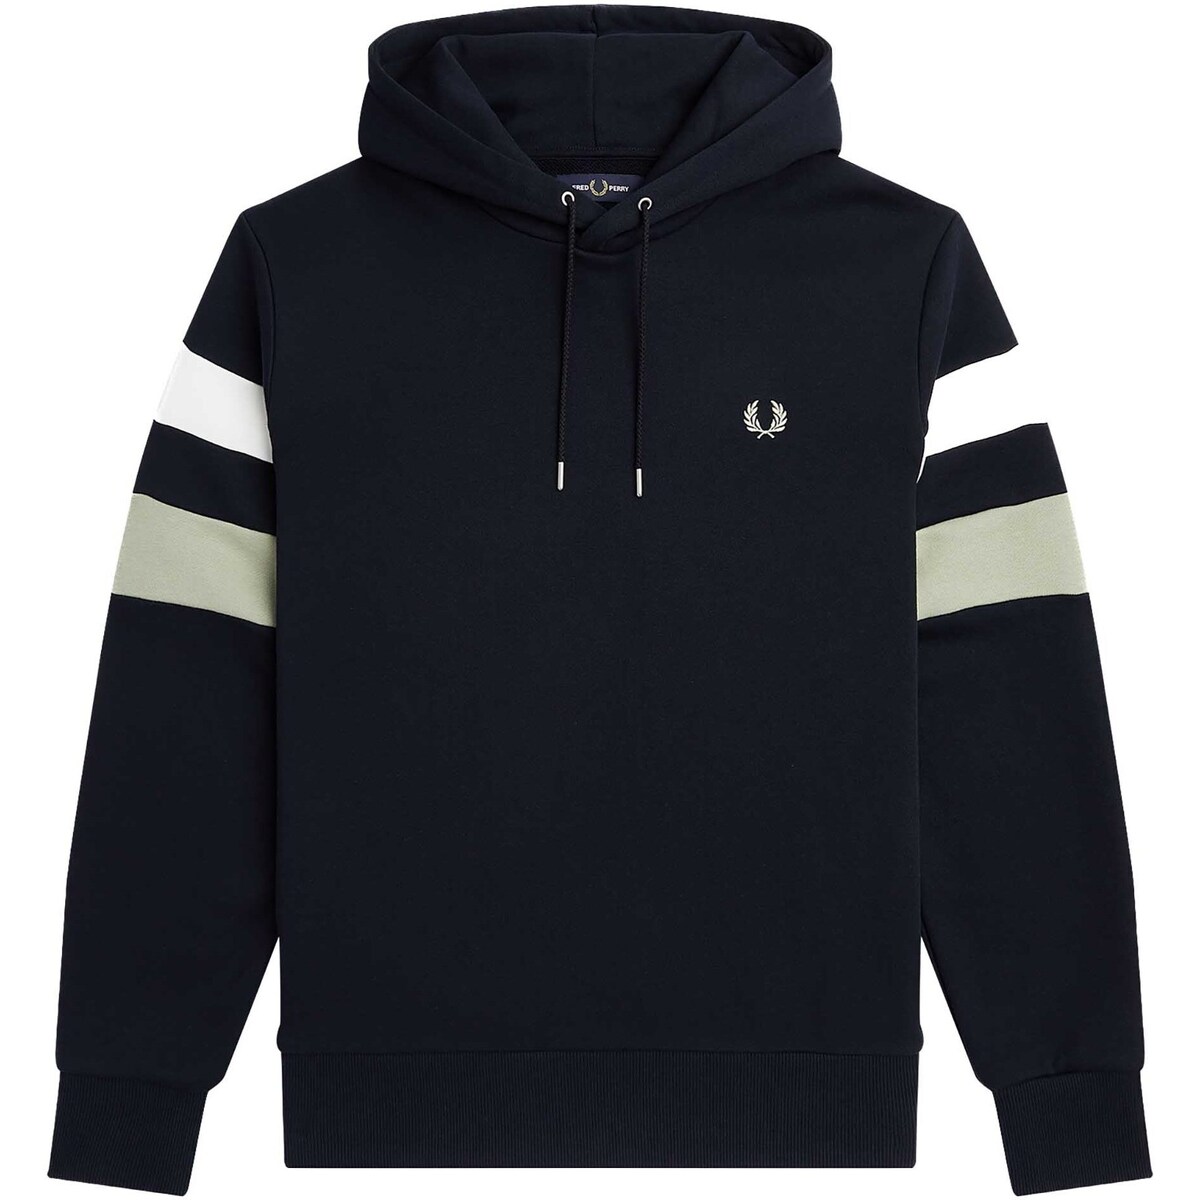 Vêtements Homme Polaires Fred Perry Felpa Fred Perry Tipped Sleeve Bleu